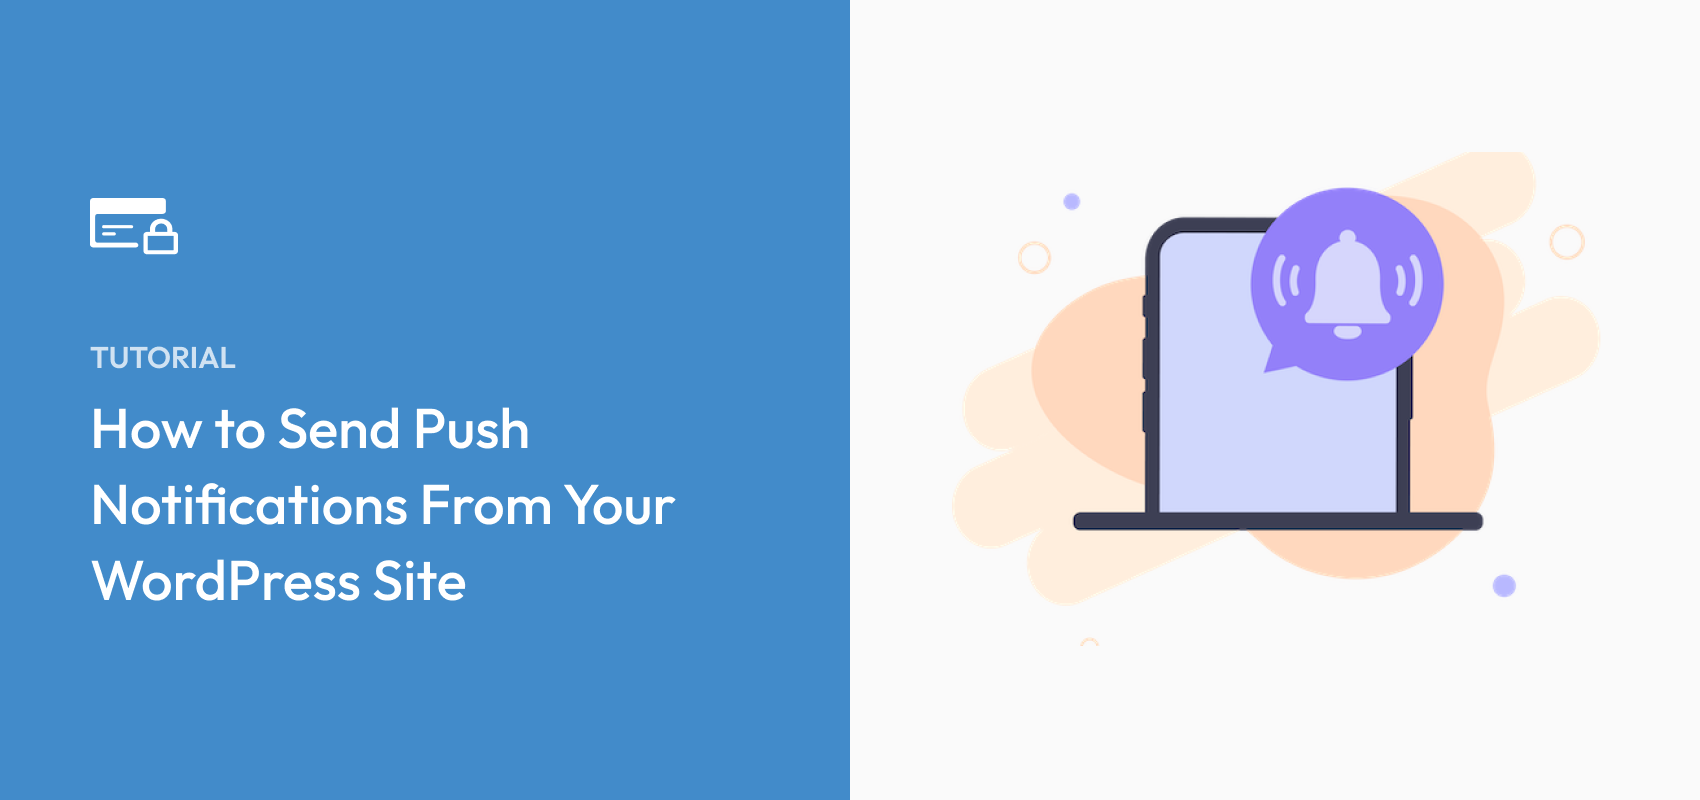 How to Send Push Notifications From Your WordPress Site